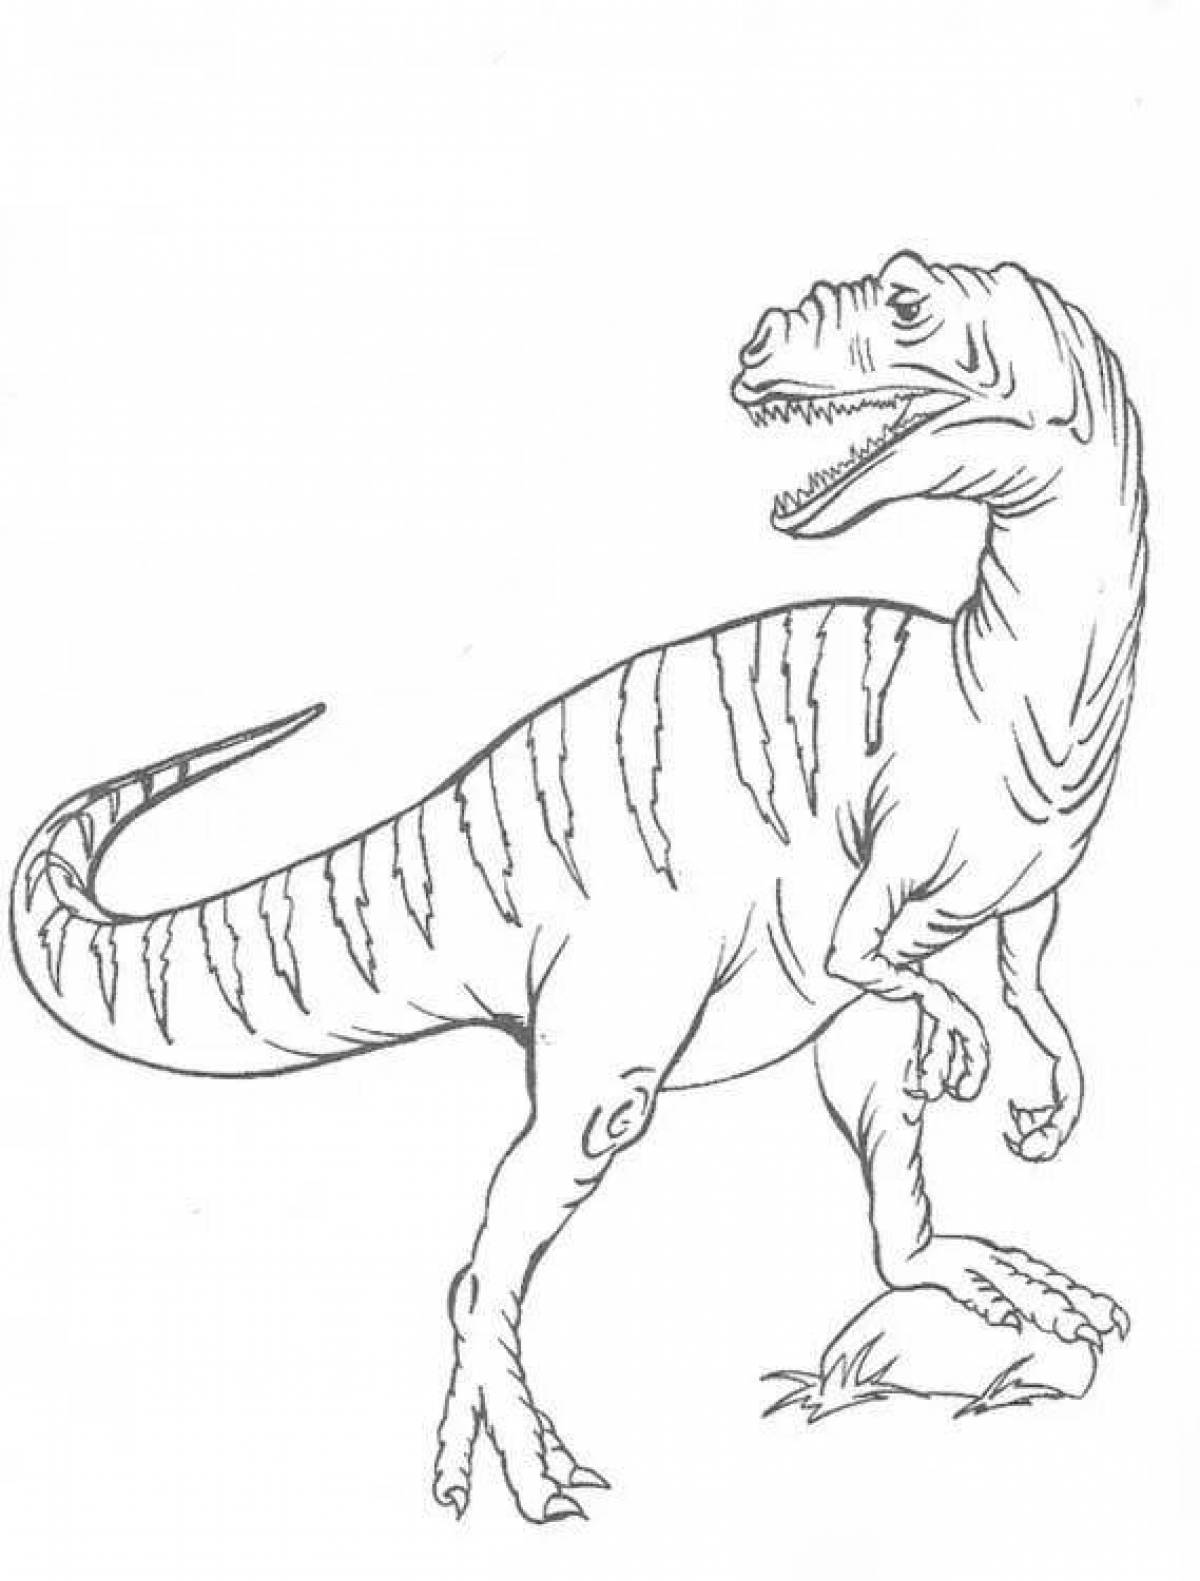 Allosaurus coloring book with colorful engraving